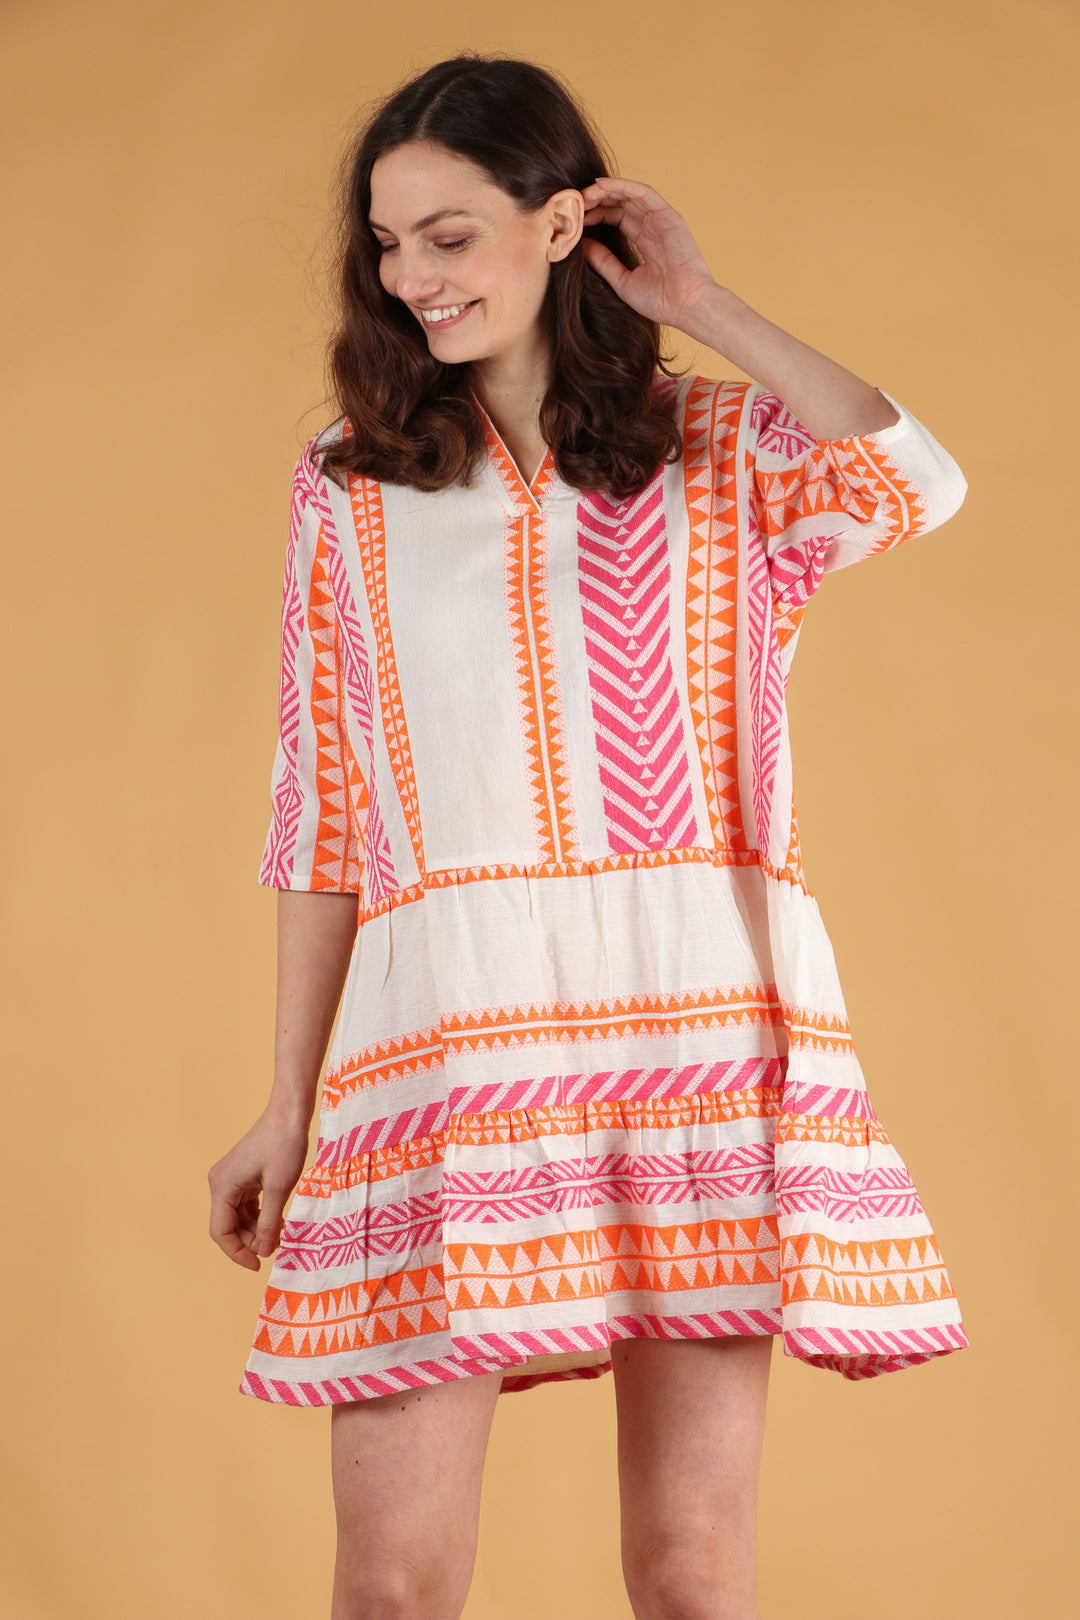 model wearing a cream, pink and orange midi dress with an aztec print pattern and 3/4 sleeves